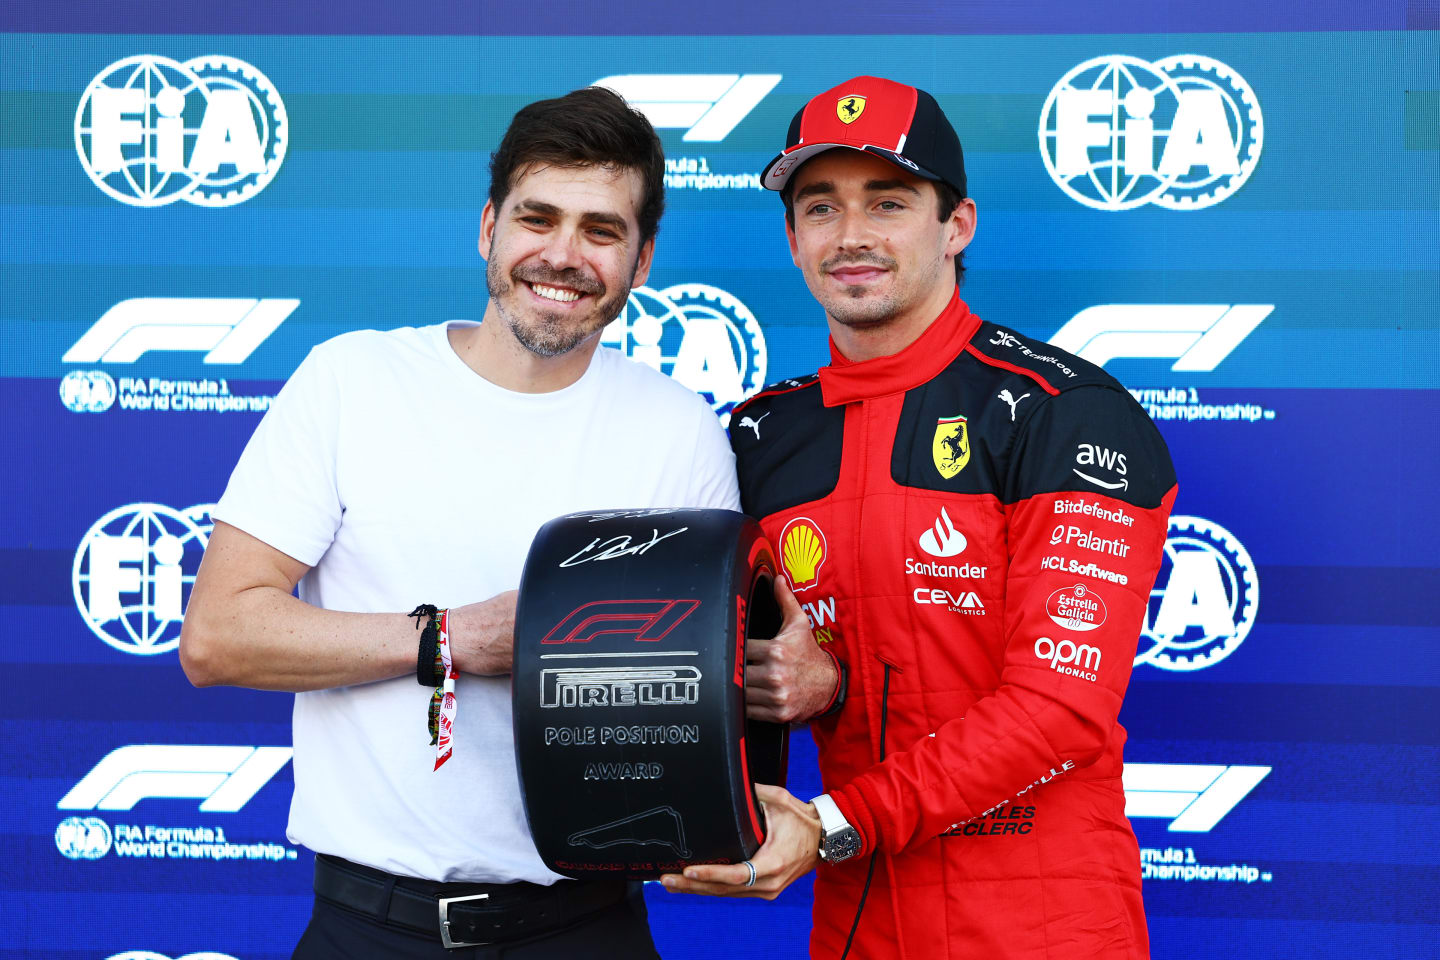 MEXICO CITY, MEXICO - OCTOBER 28: Pole position qualifier Charles Leclerc of Monaco and Ferrari is